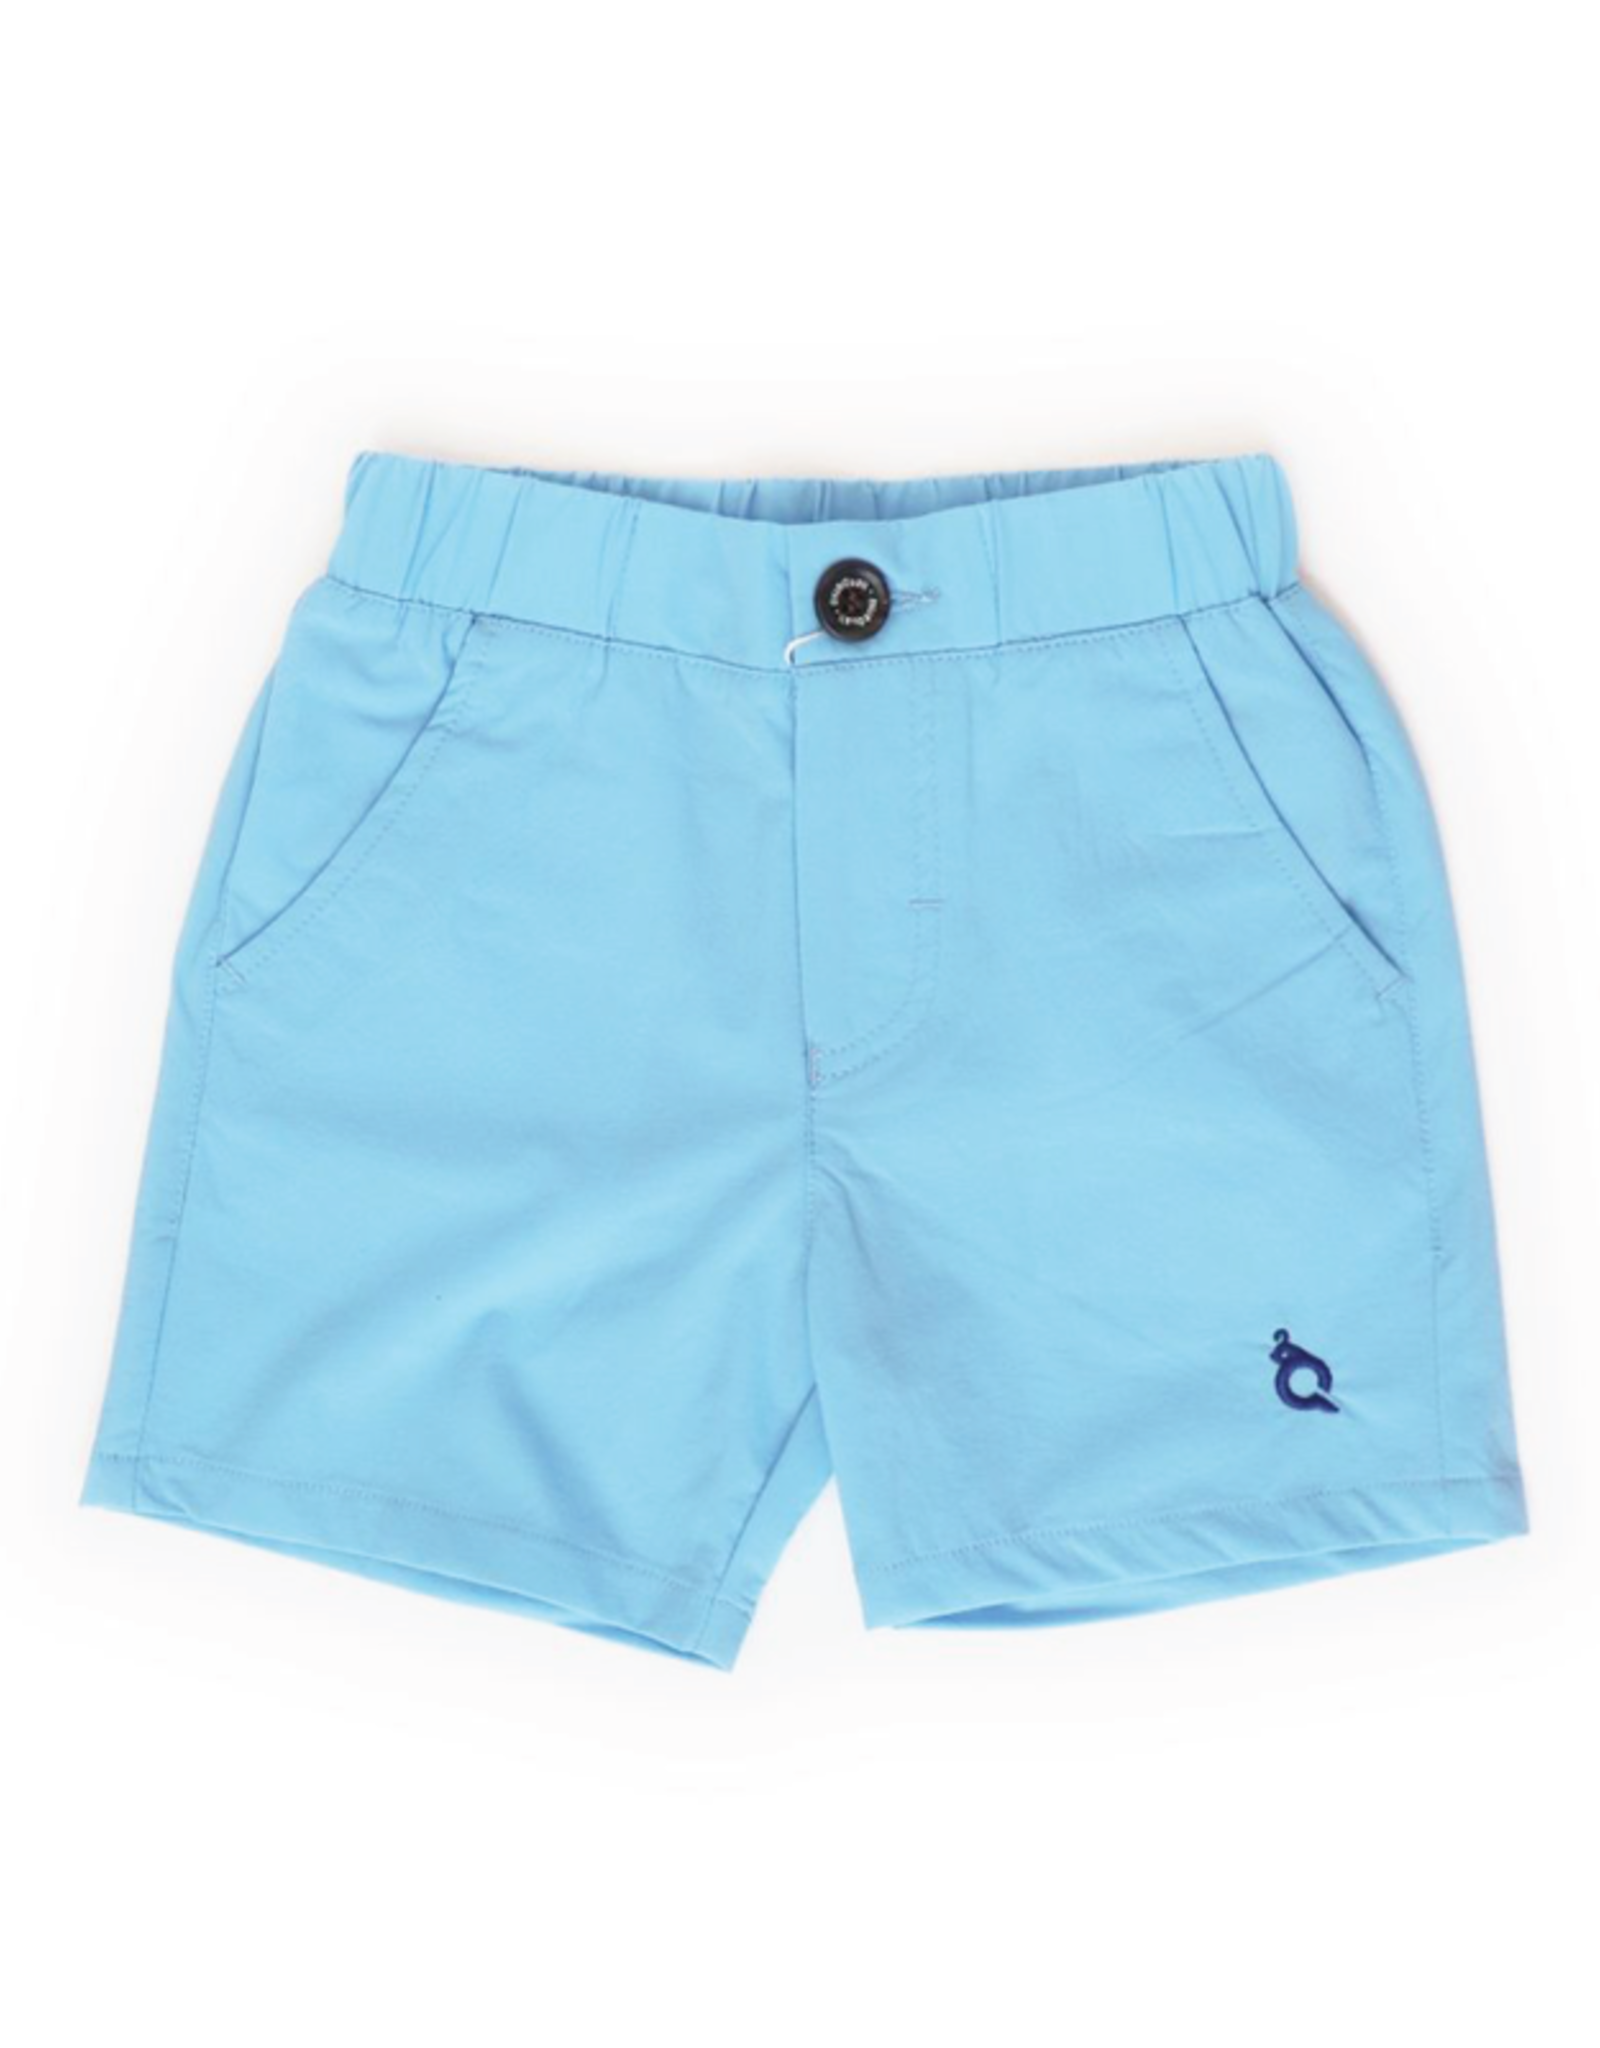 BlueQuail Clothing Co. Everyday Collection Light Blue Shorts